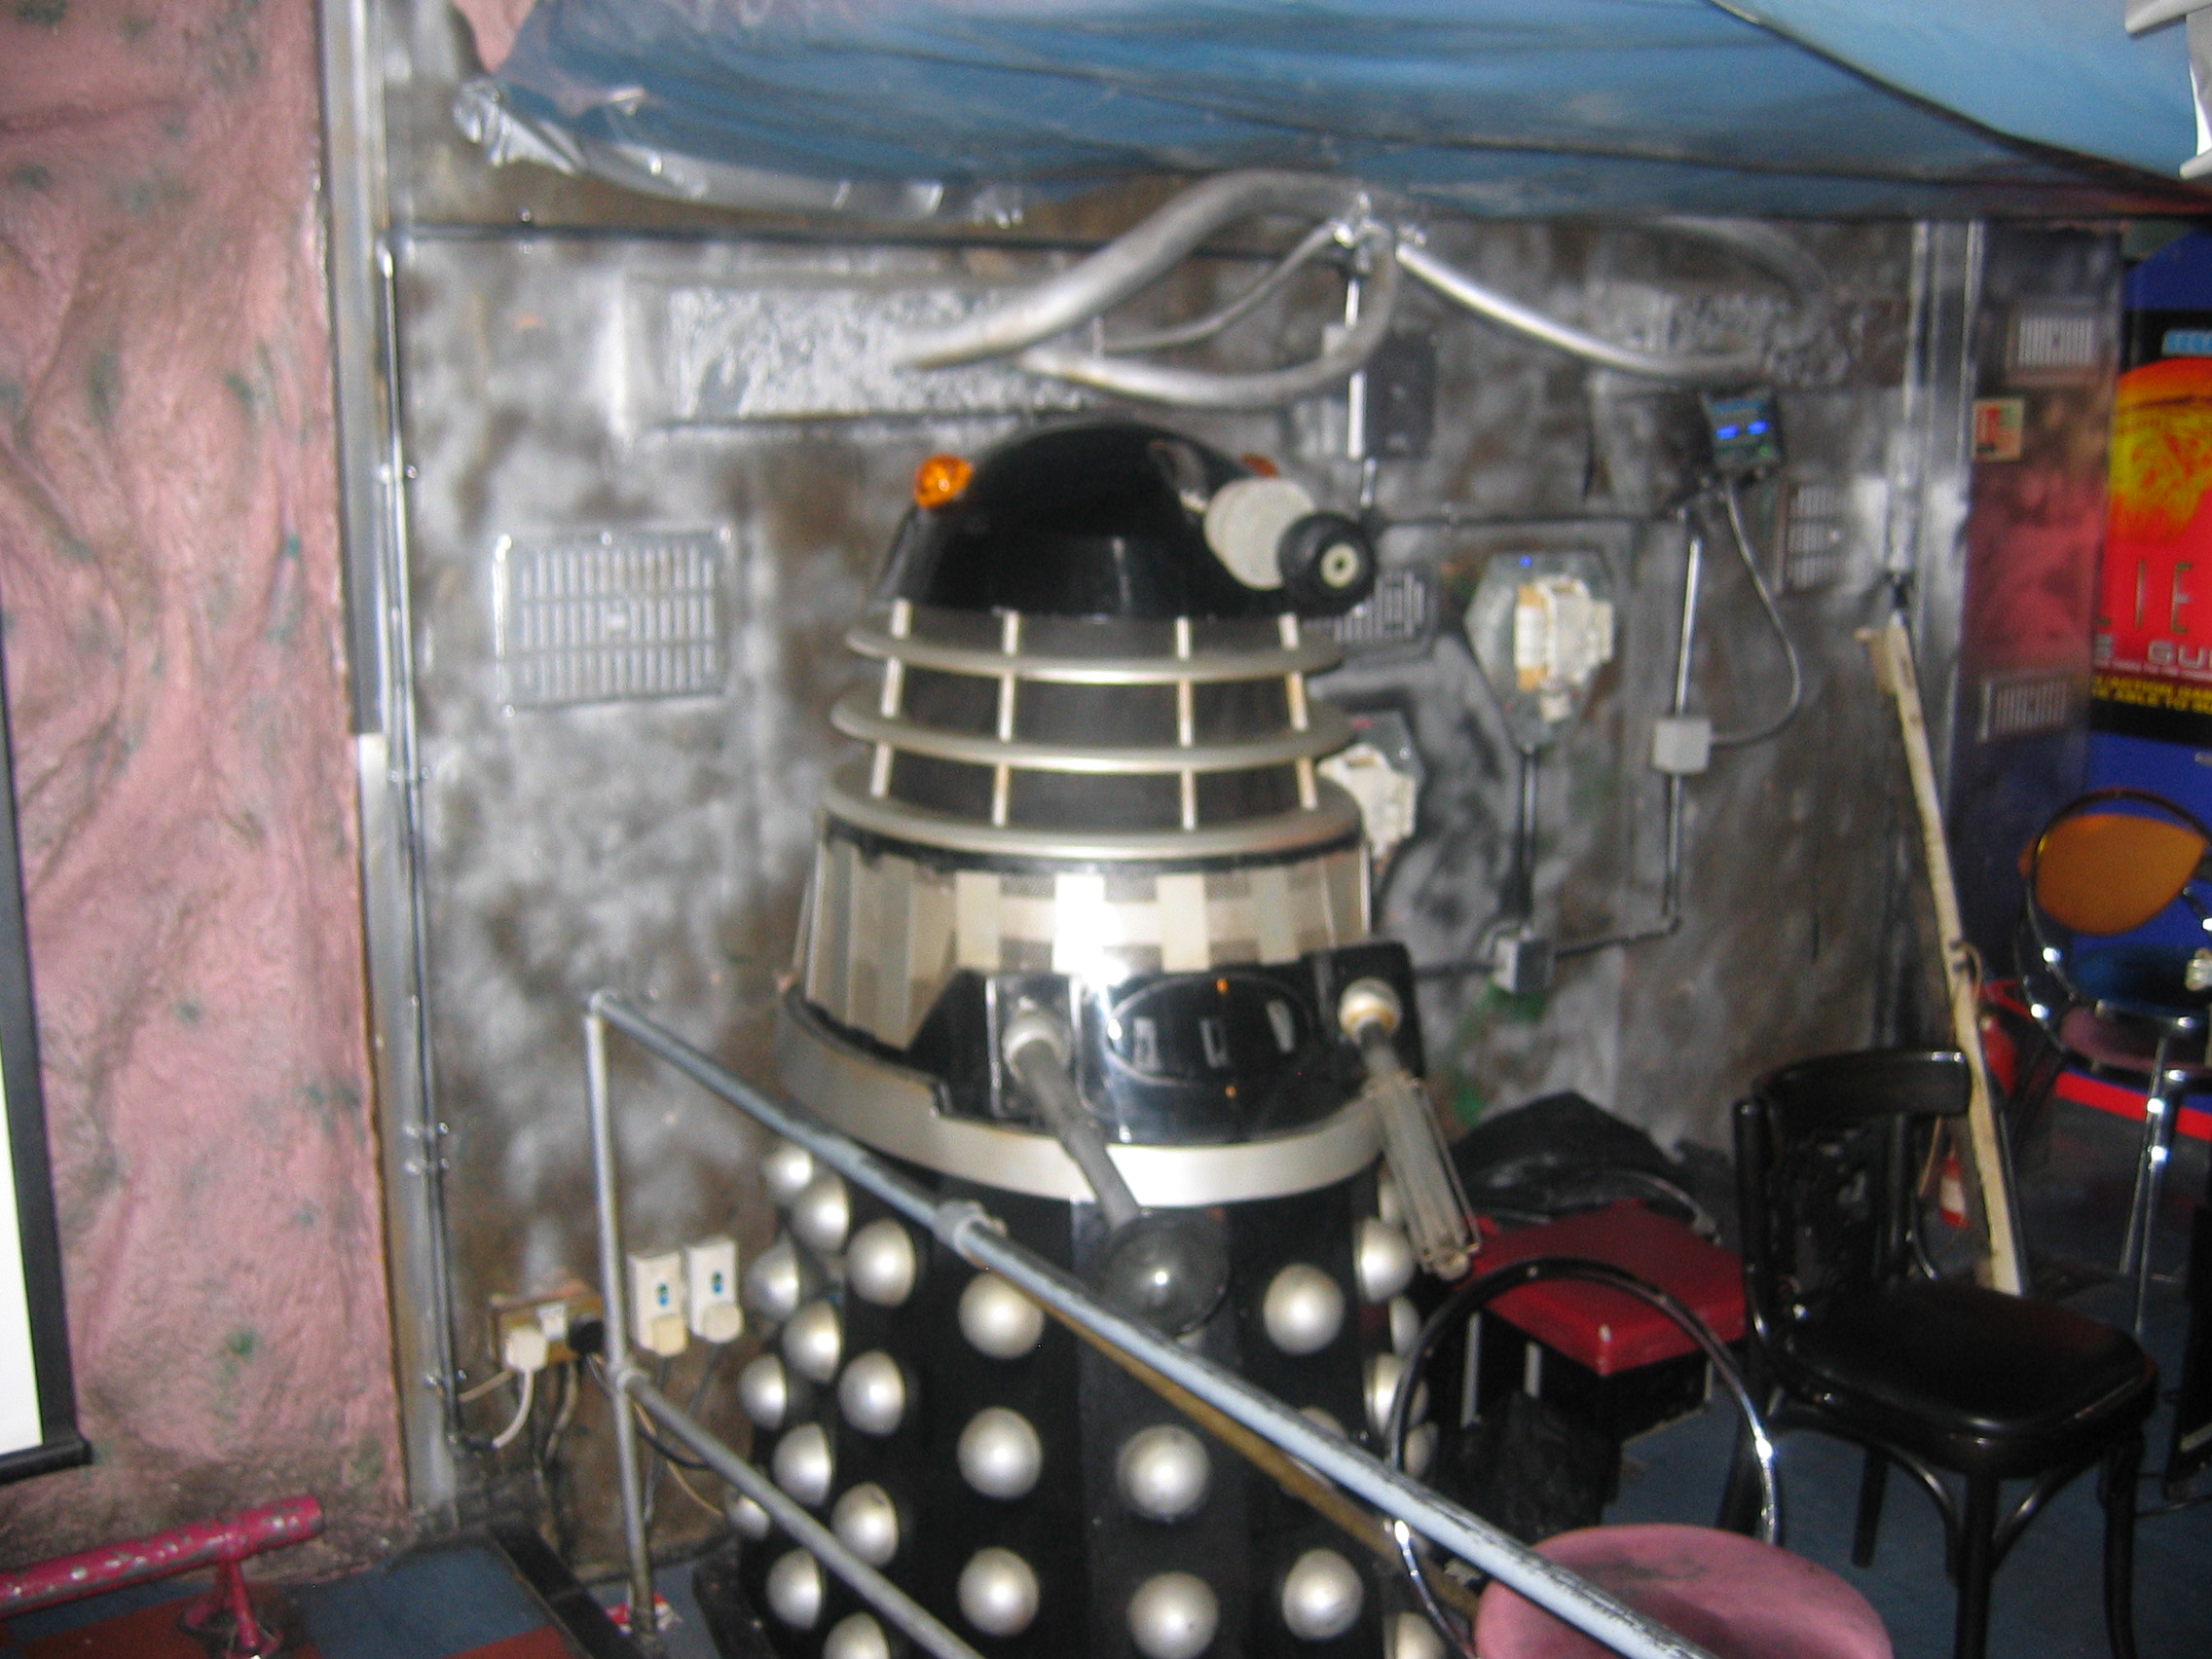  Photo taken by me – A Dalek displayed in FAB Café Manchester    